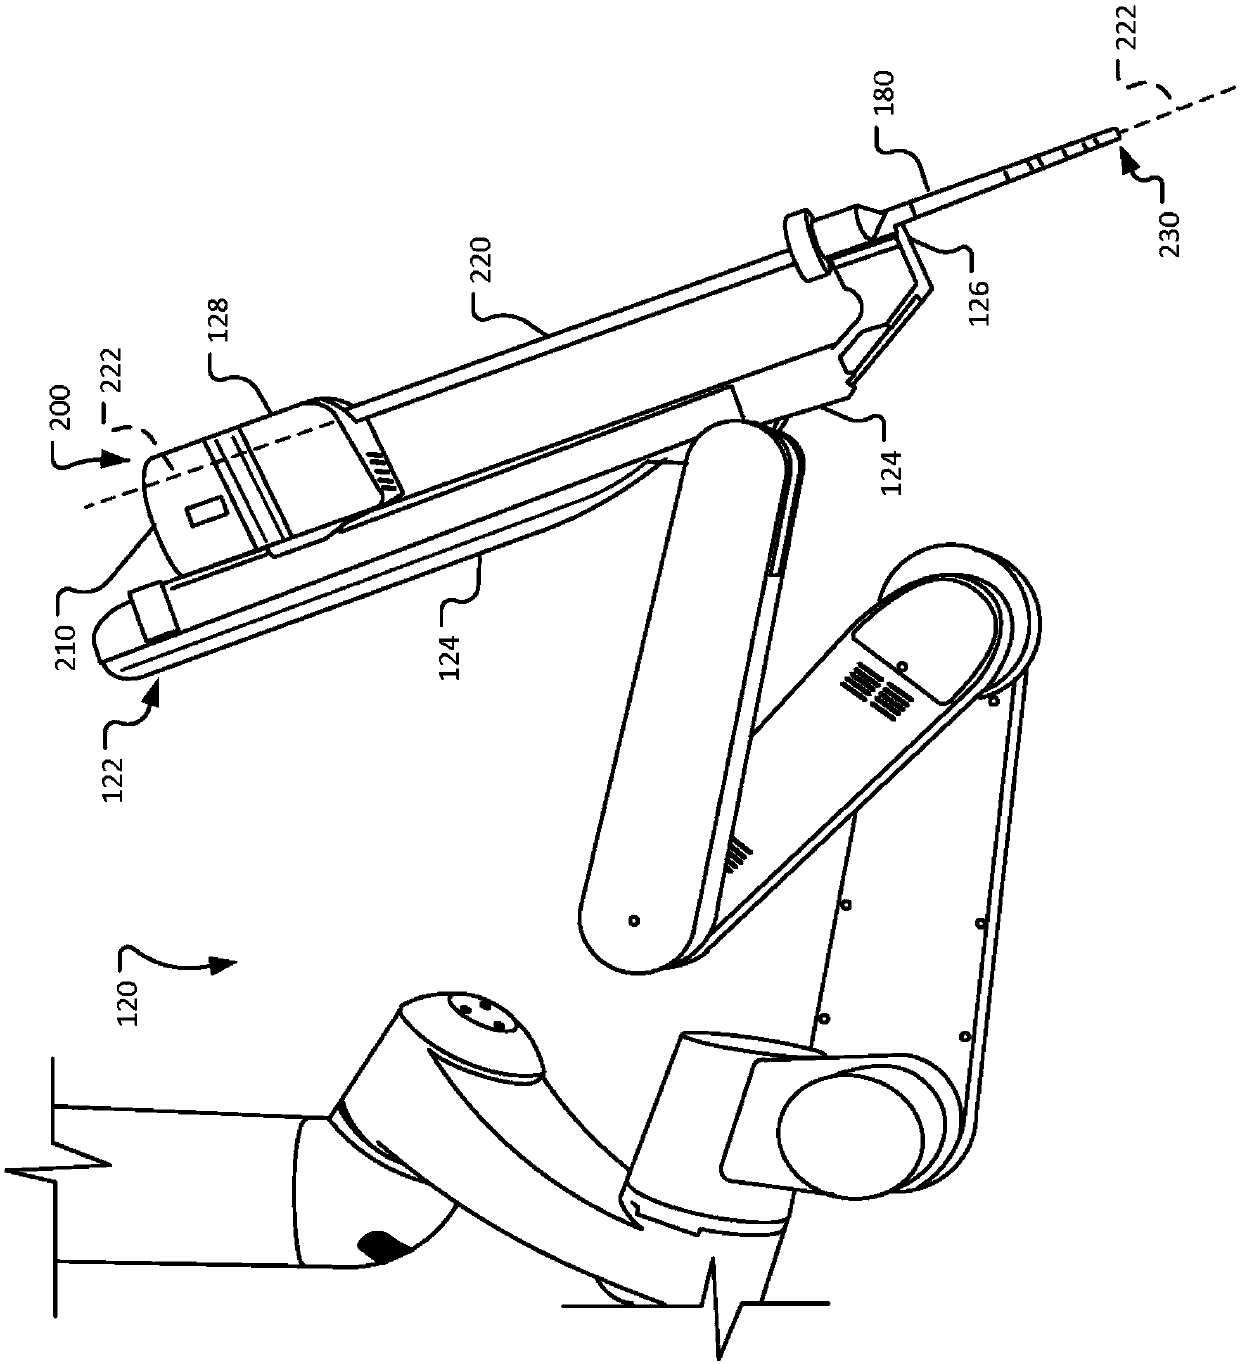 Computer-assisted tele-operated surgery systems and methods